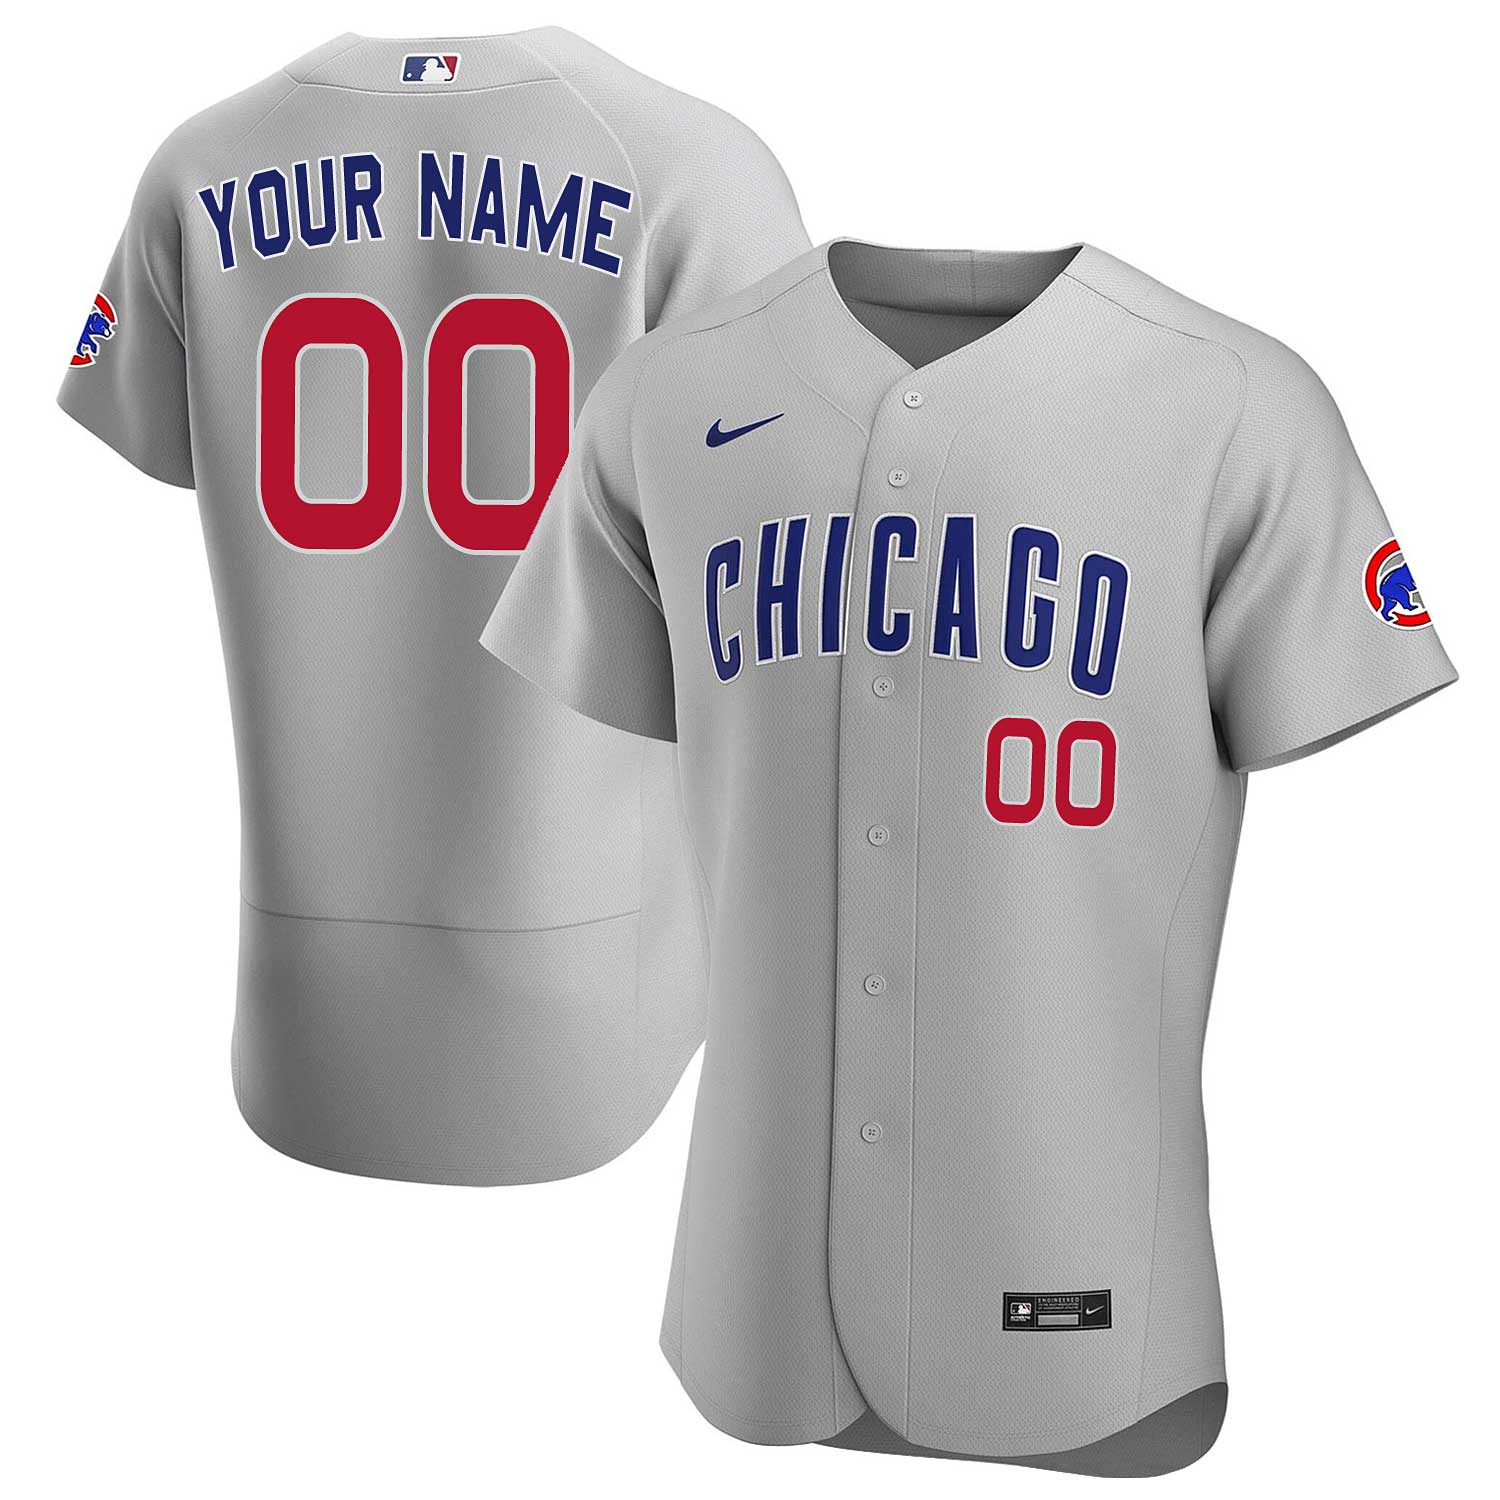 Chicago Cubs Customized Nike Authentic Road Jersey 56 = 3X/4X-Large